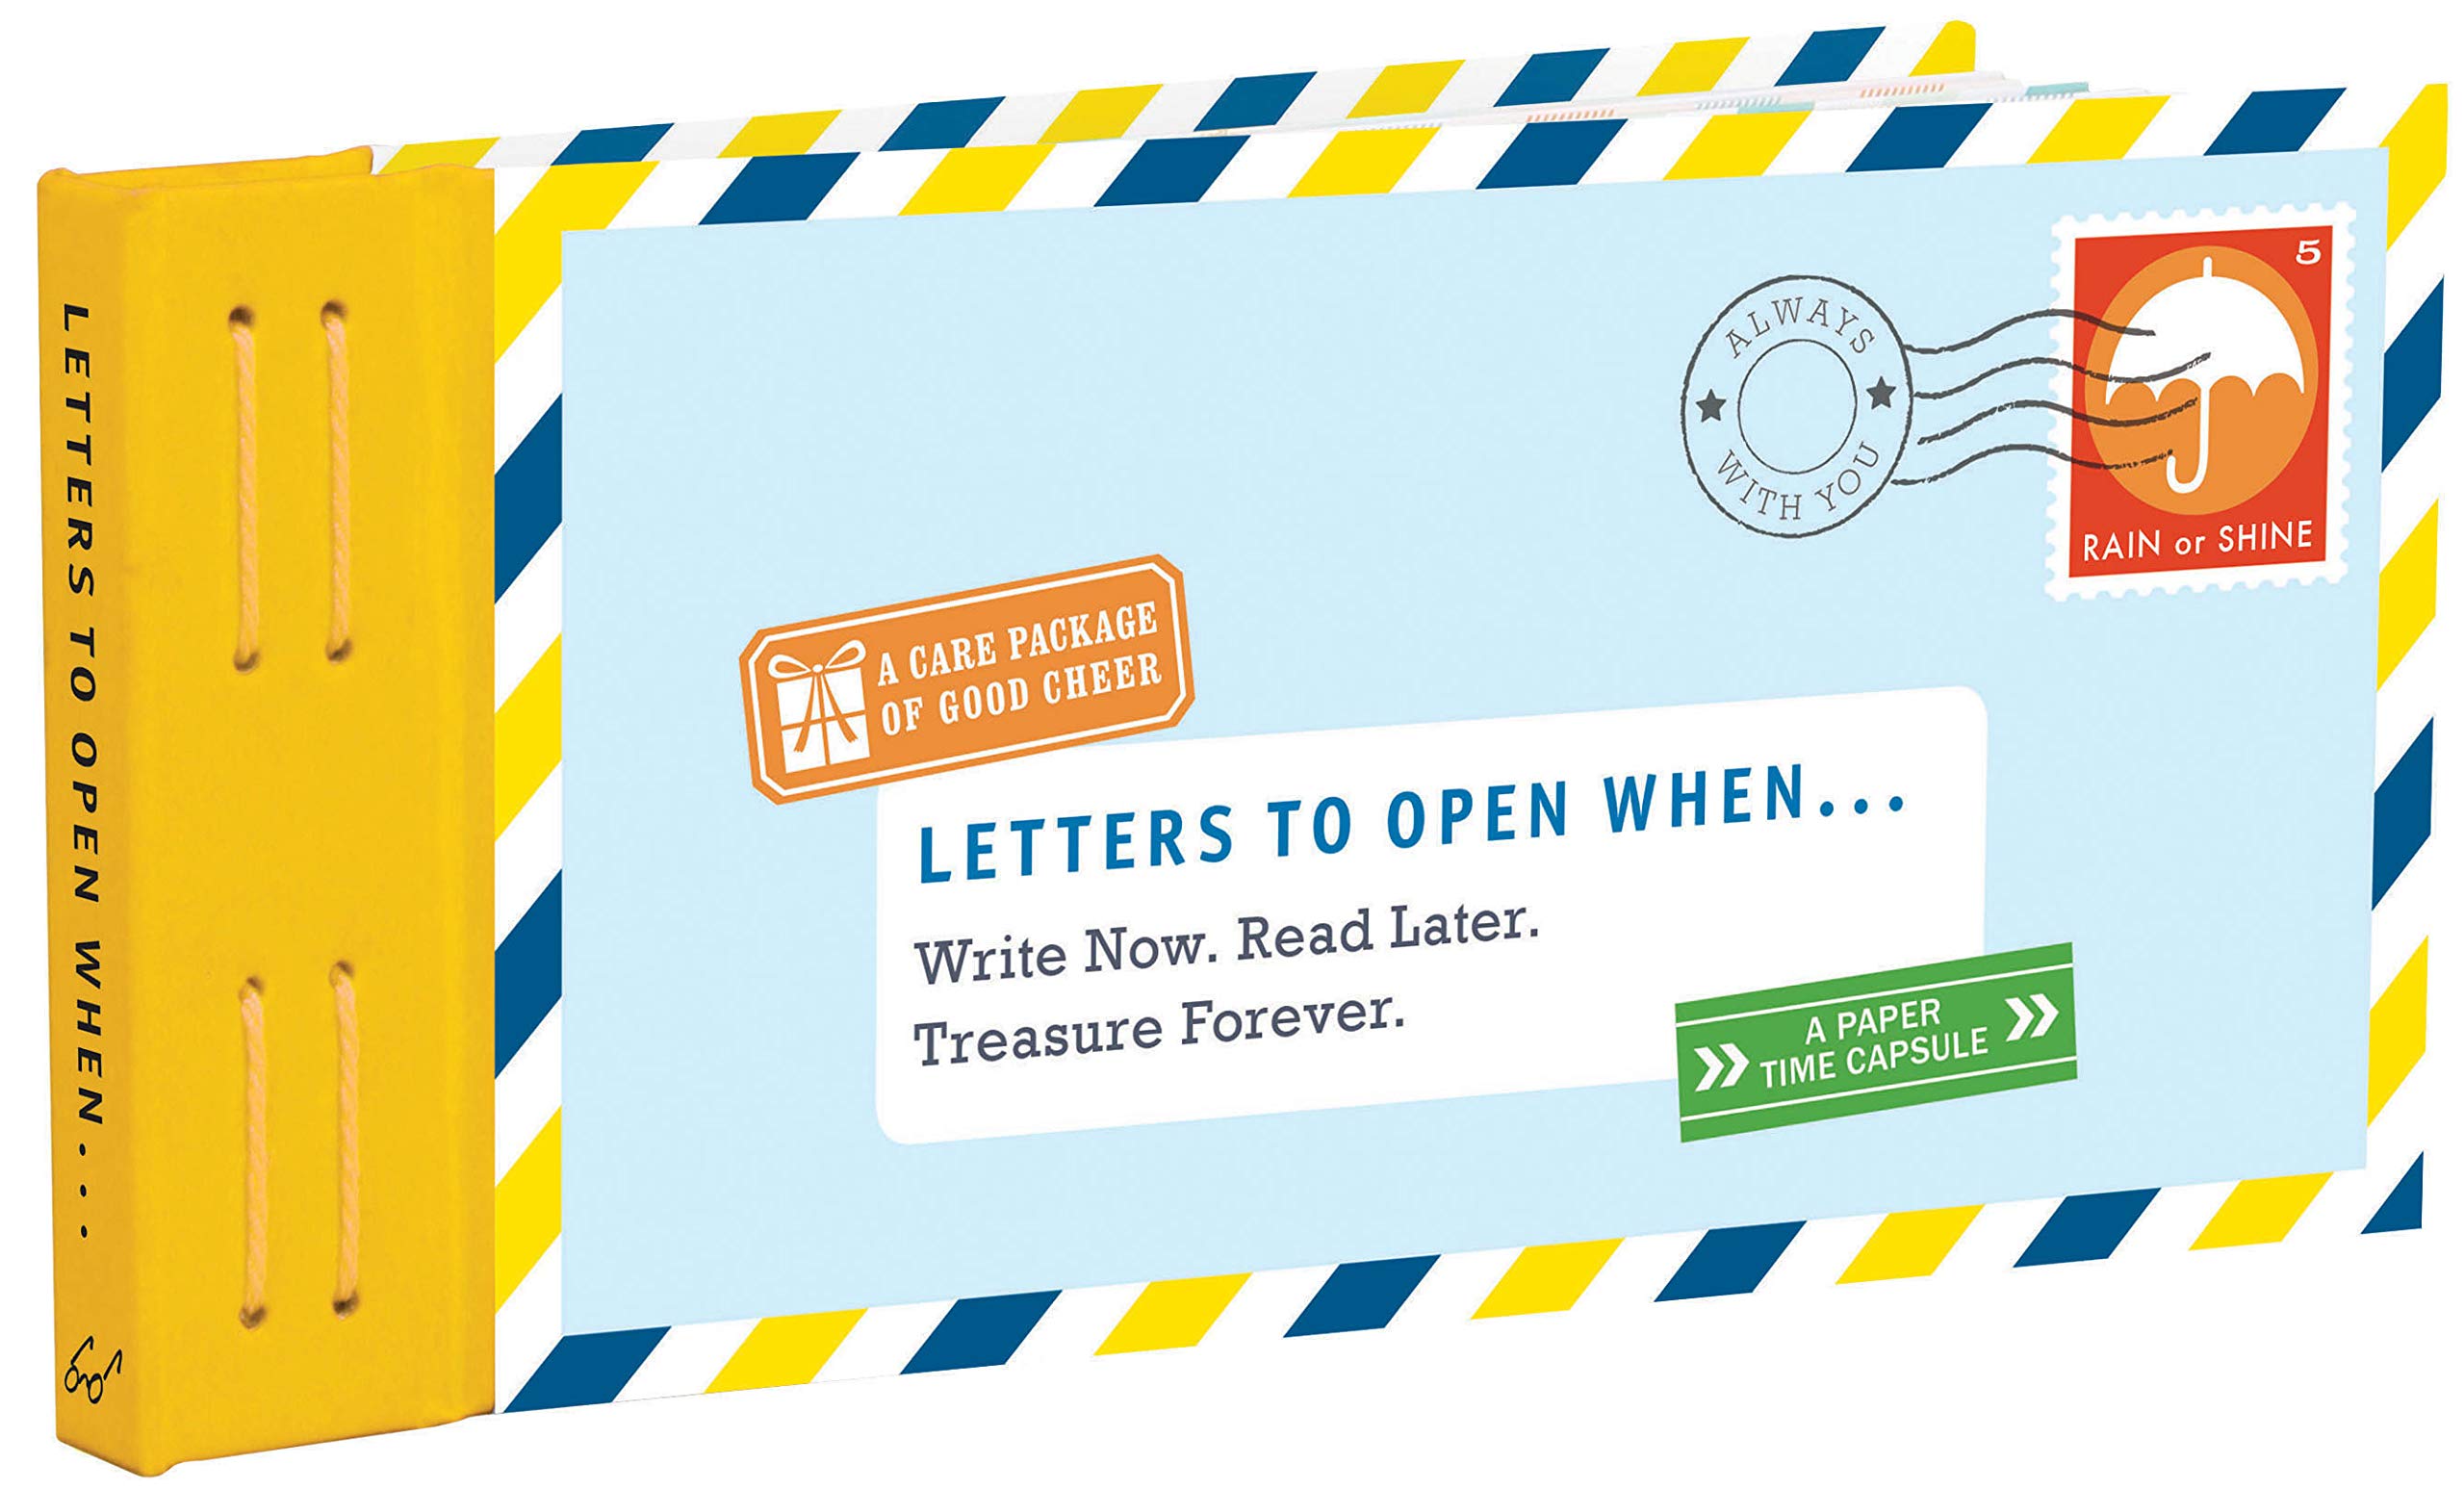 Letters to open when